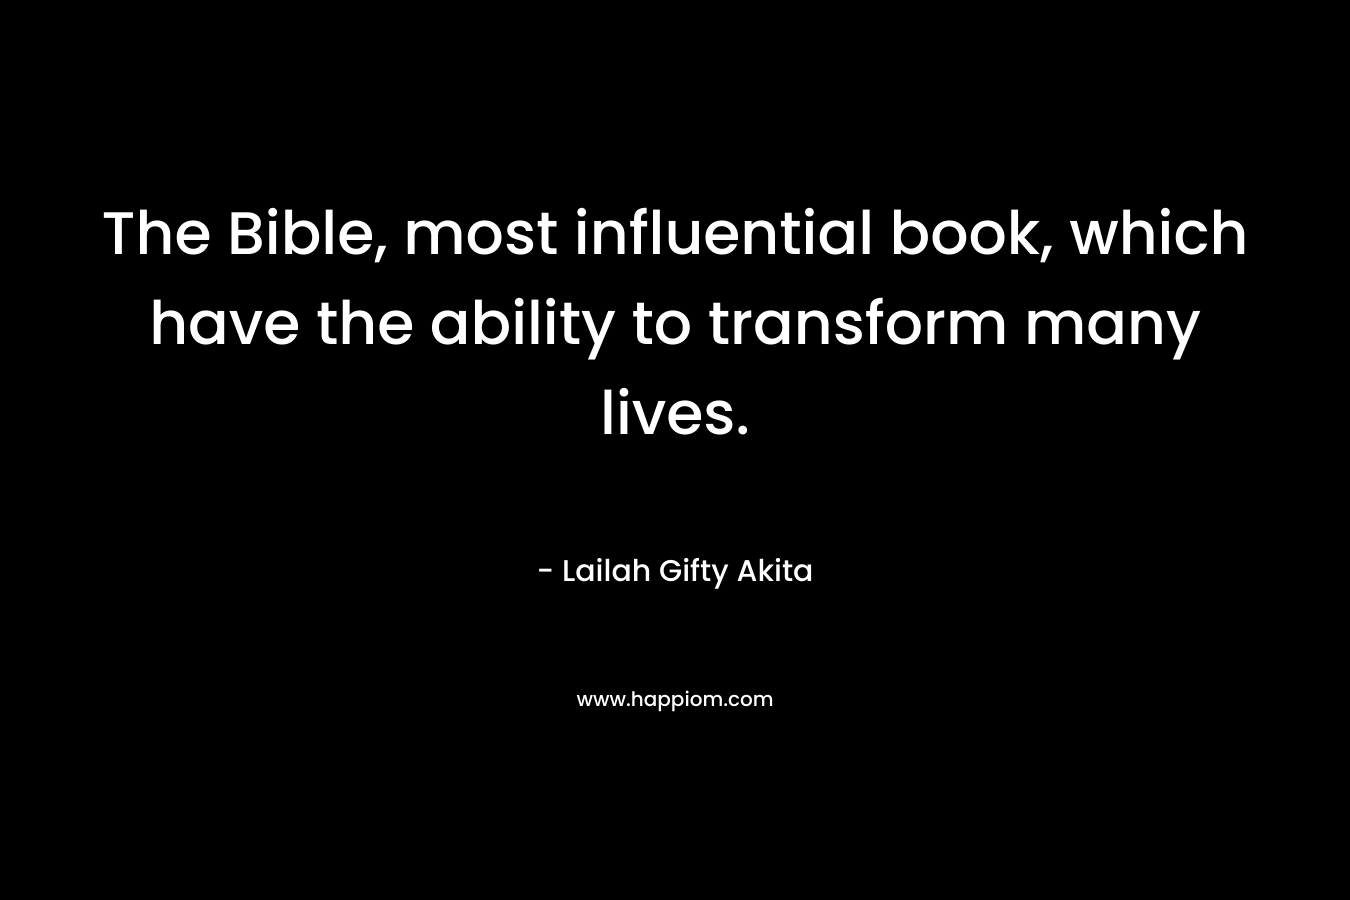 The Bible, most influential book, which have the ability to transform many lives.